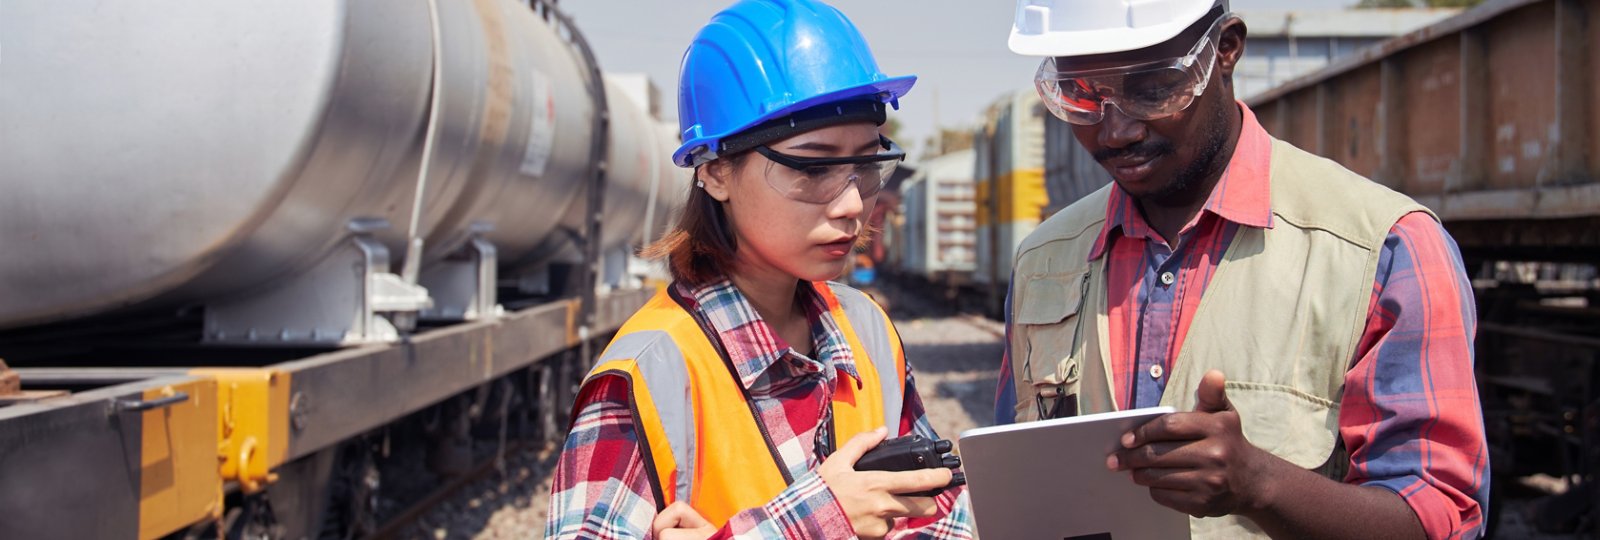 An engineer or technician, a freight train maintenance specialist, stands holding a tablet and is discussing outdoor maintenance work.